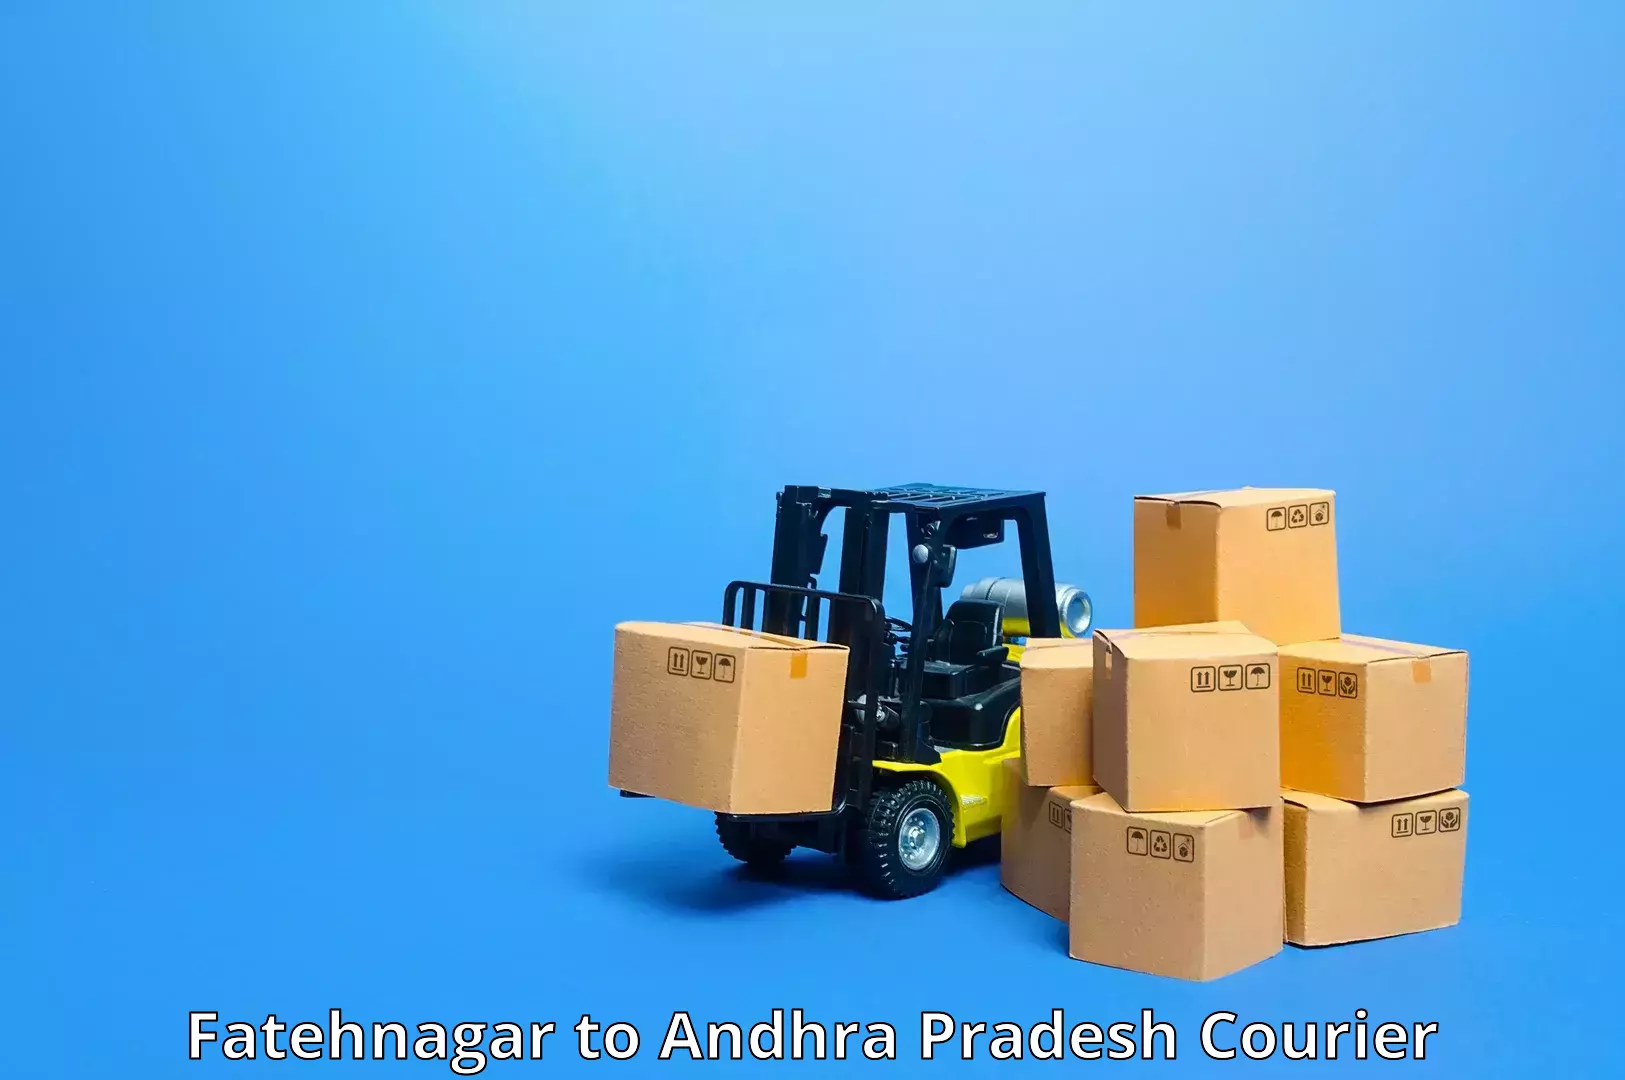 Reliable shipping solutions Fatehnagar to Visakhapatnam Port